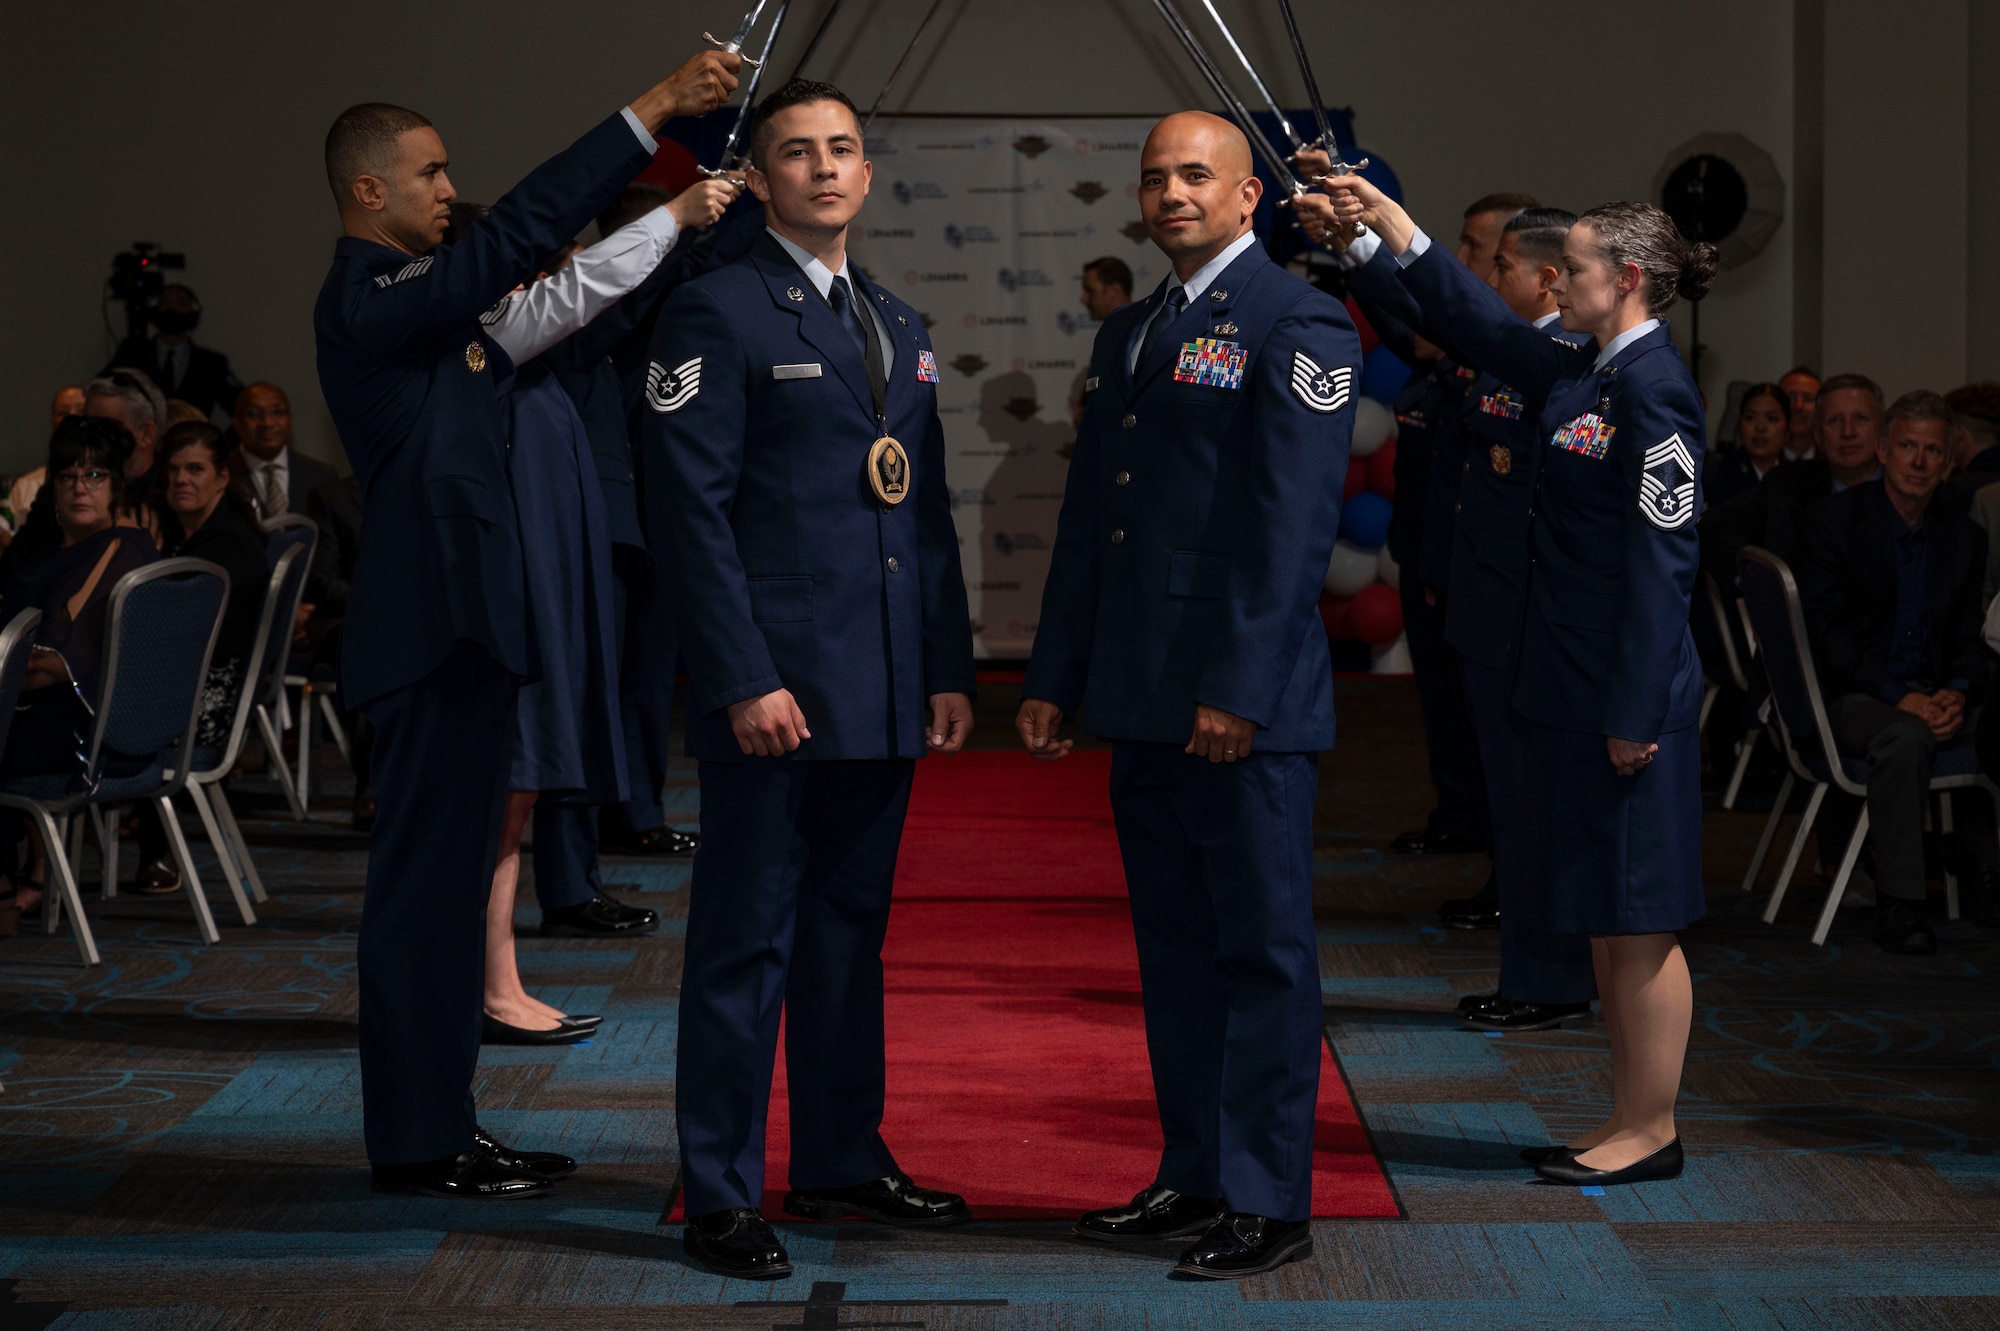 AFSOC Outstanding Airmen of the Year